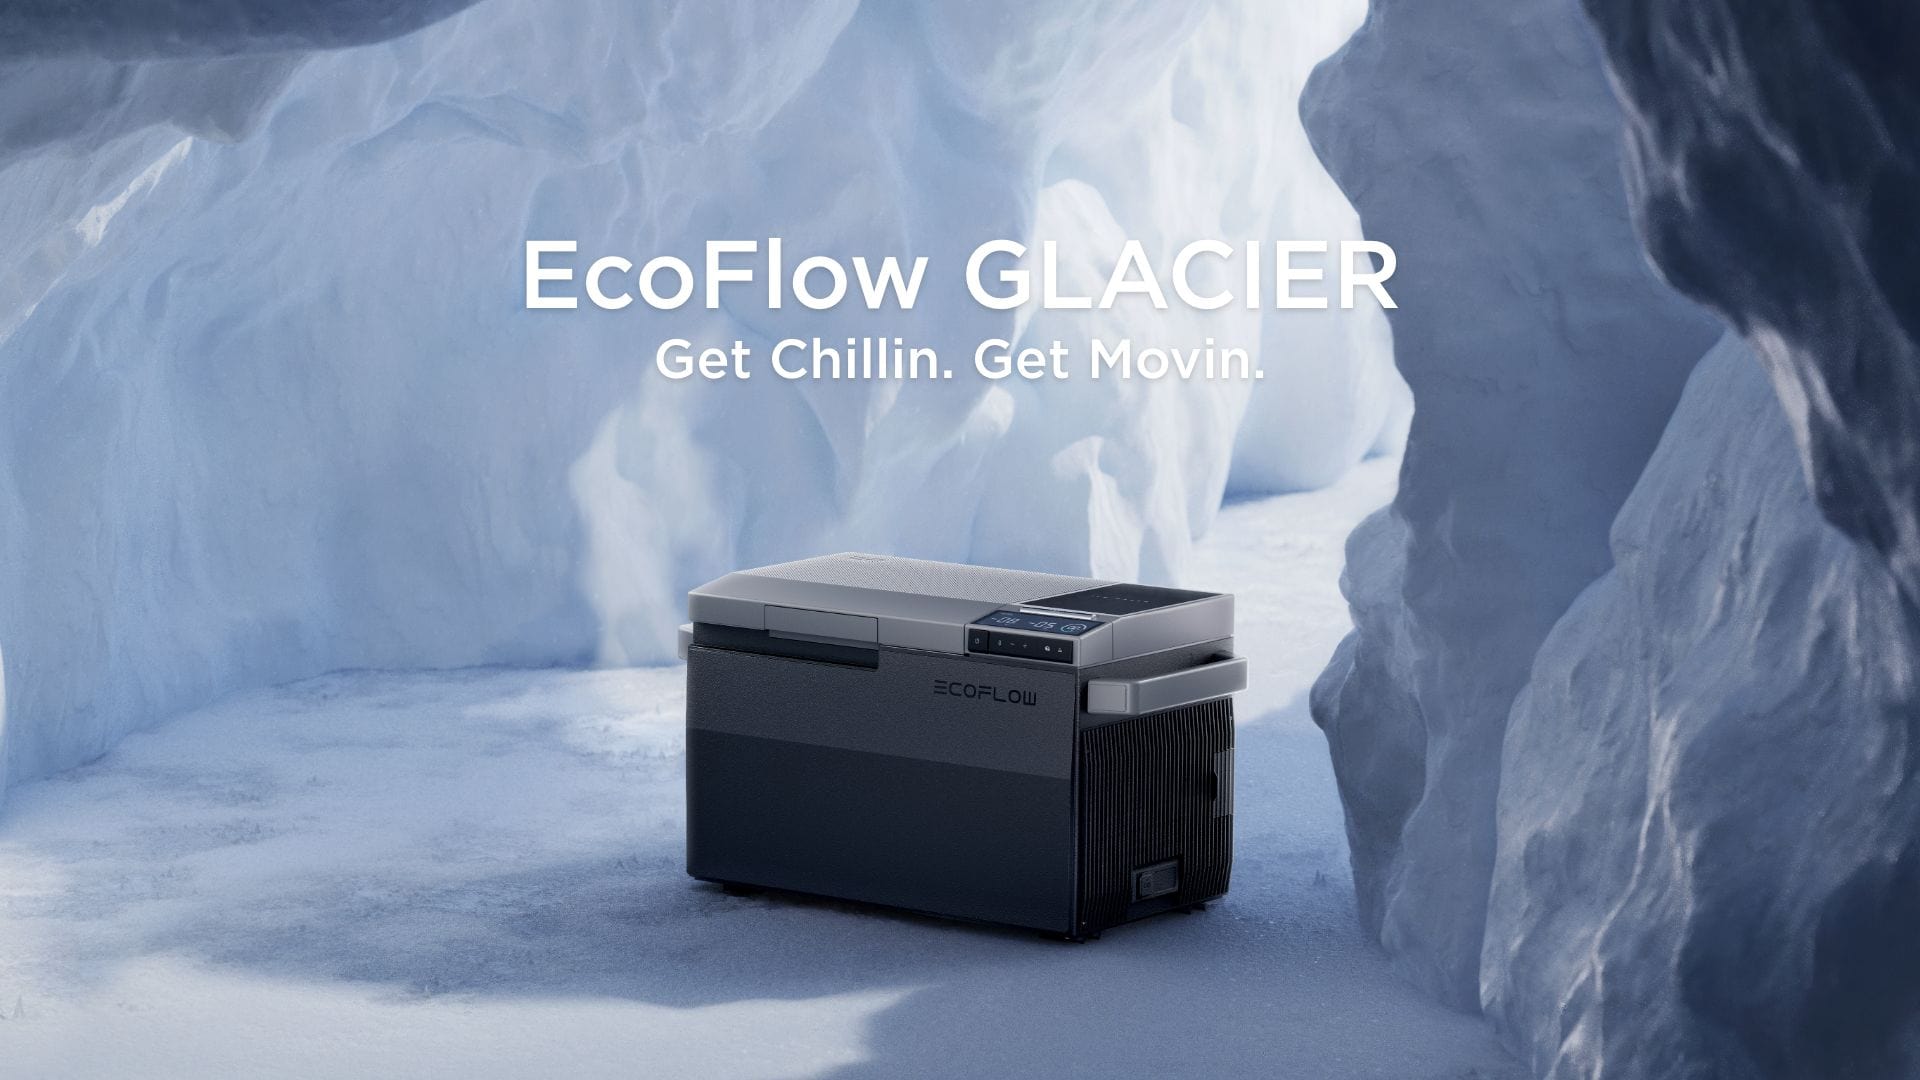 EcoFlow Glacier Full Specification Announced – Available on the 26th of April for £1049 (Fridge) + £299 (Battery)